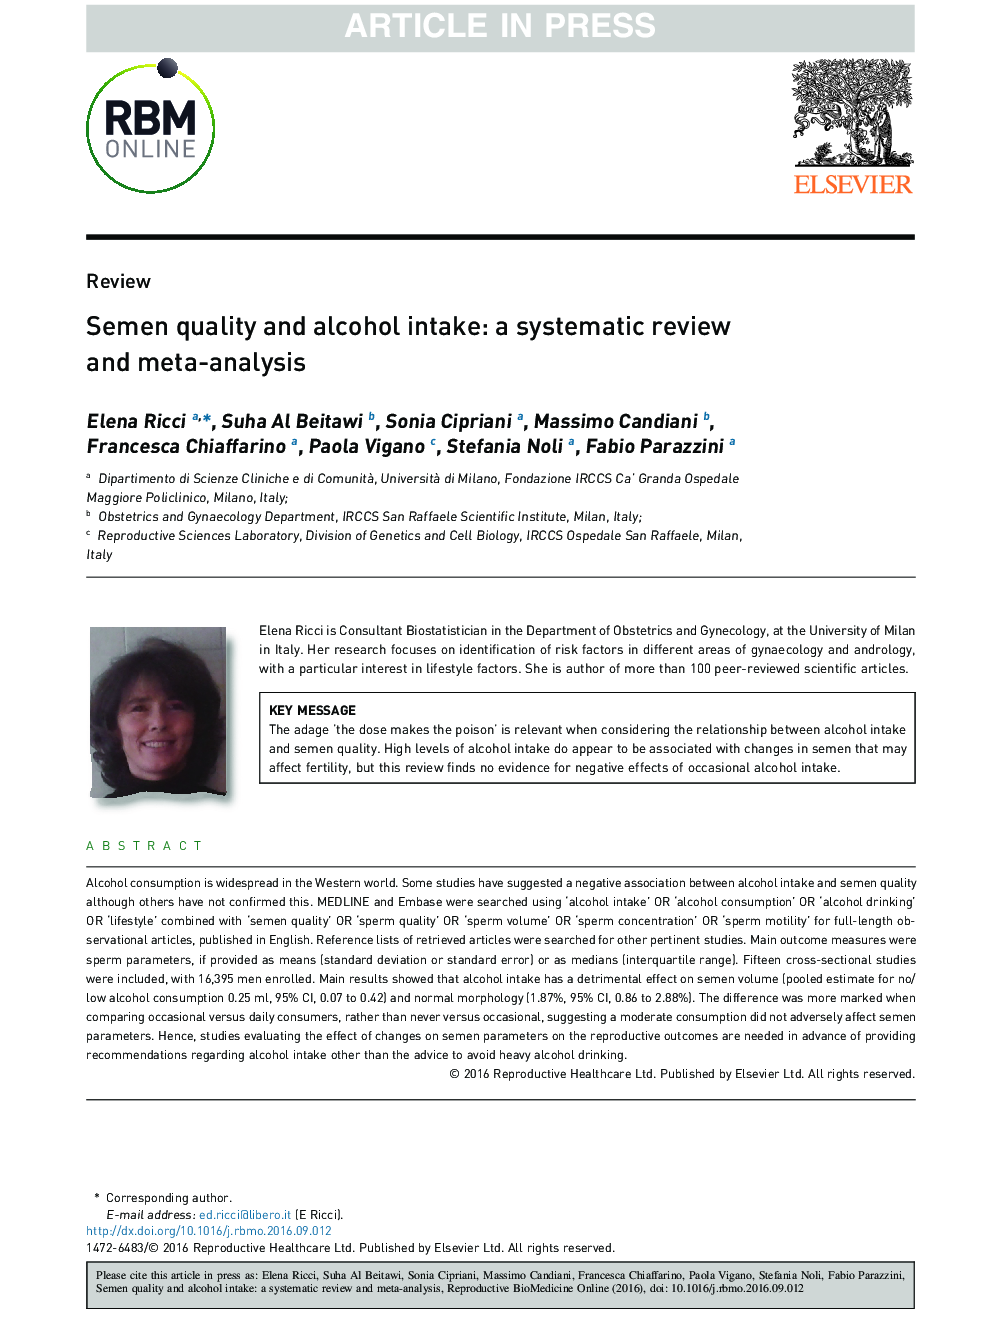 Semen quality and alcohol intake: a systematic review and meta-analysis